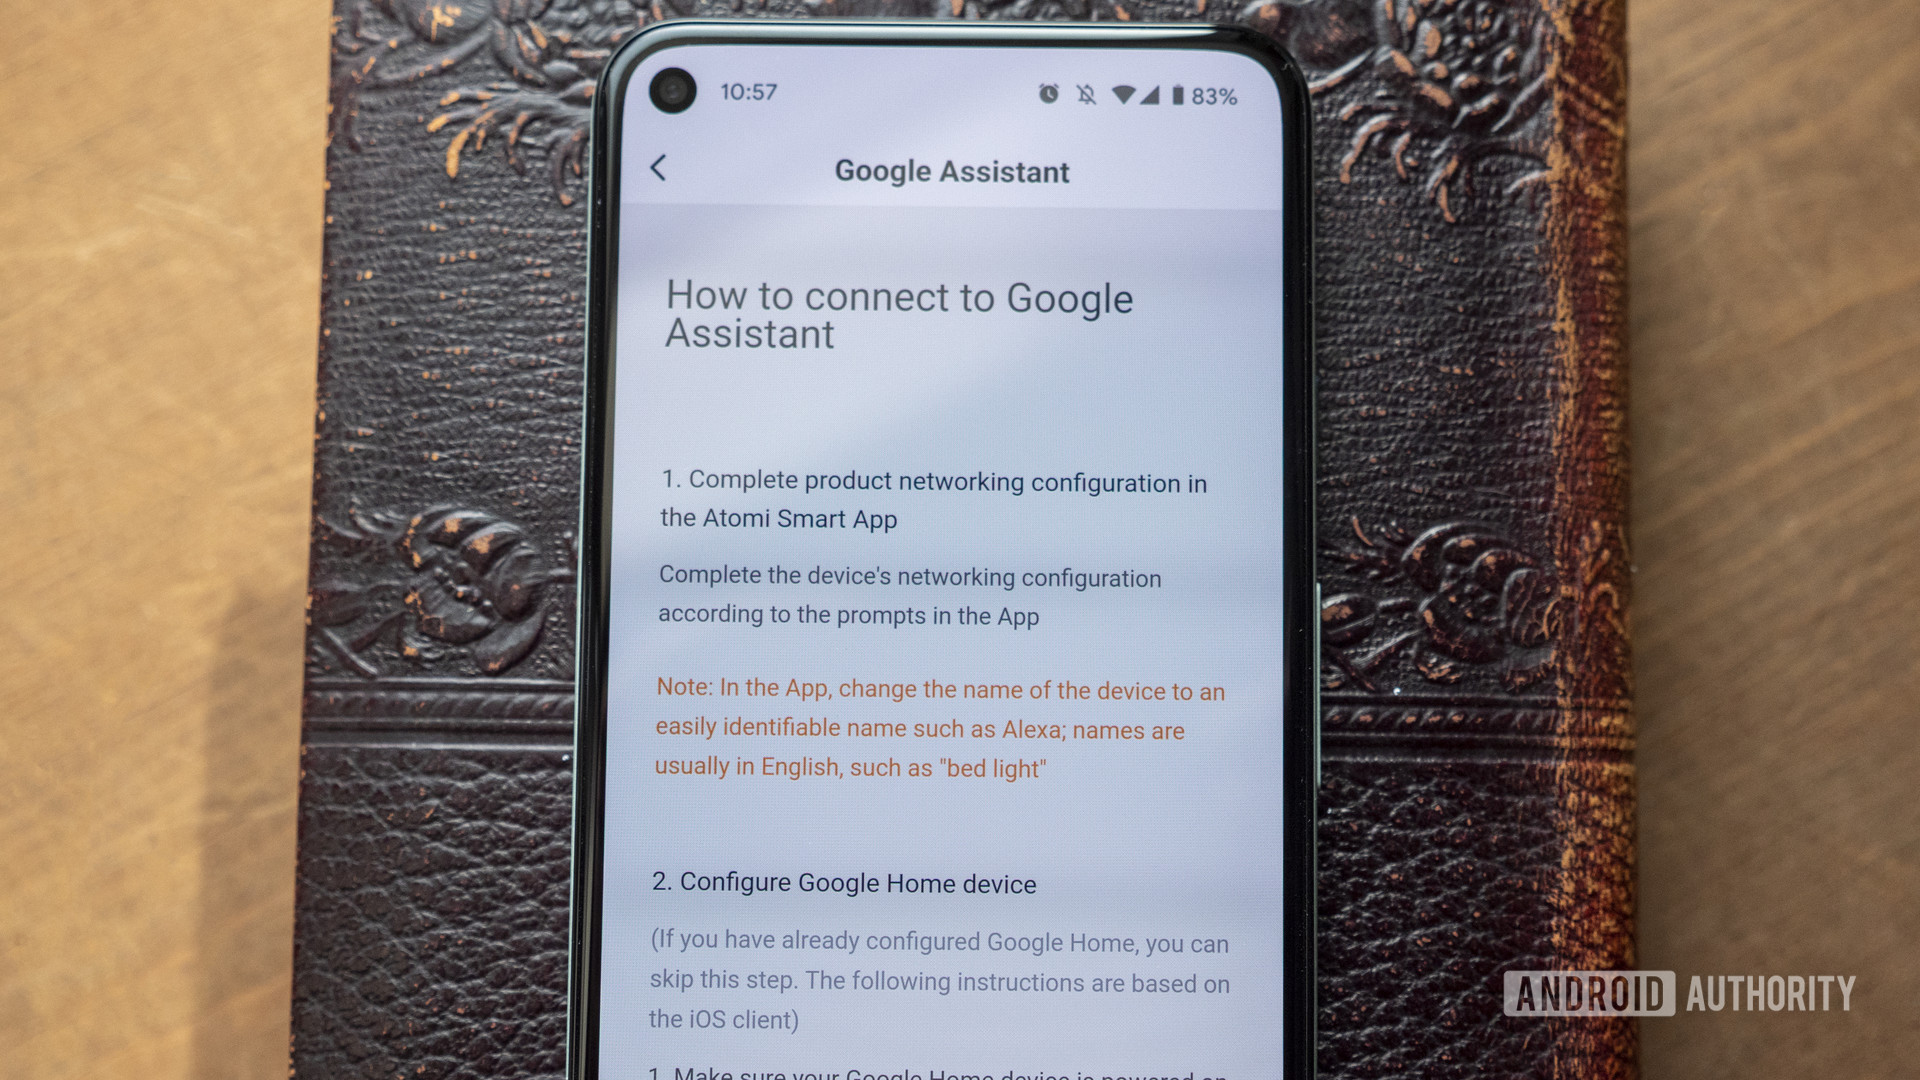 https://www.androidauthority.com/wp-content/uploads/2020/11/atomi-smart-coffee-maker-review-google-assistant-settings.jpg